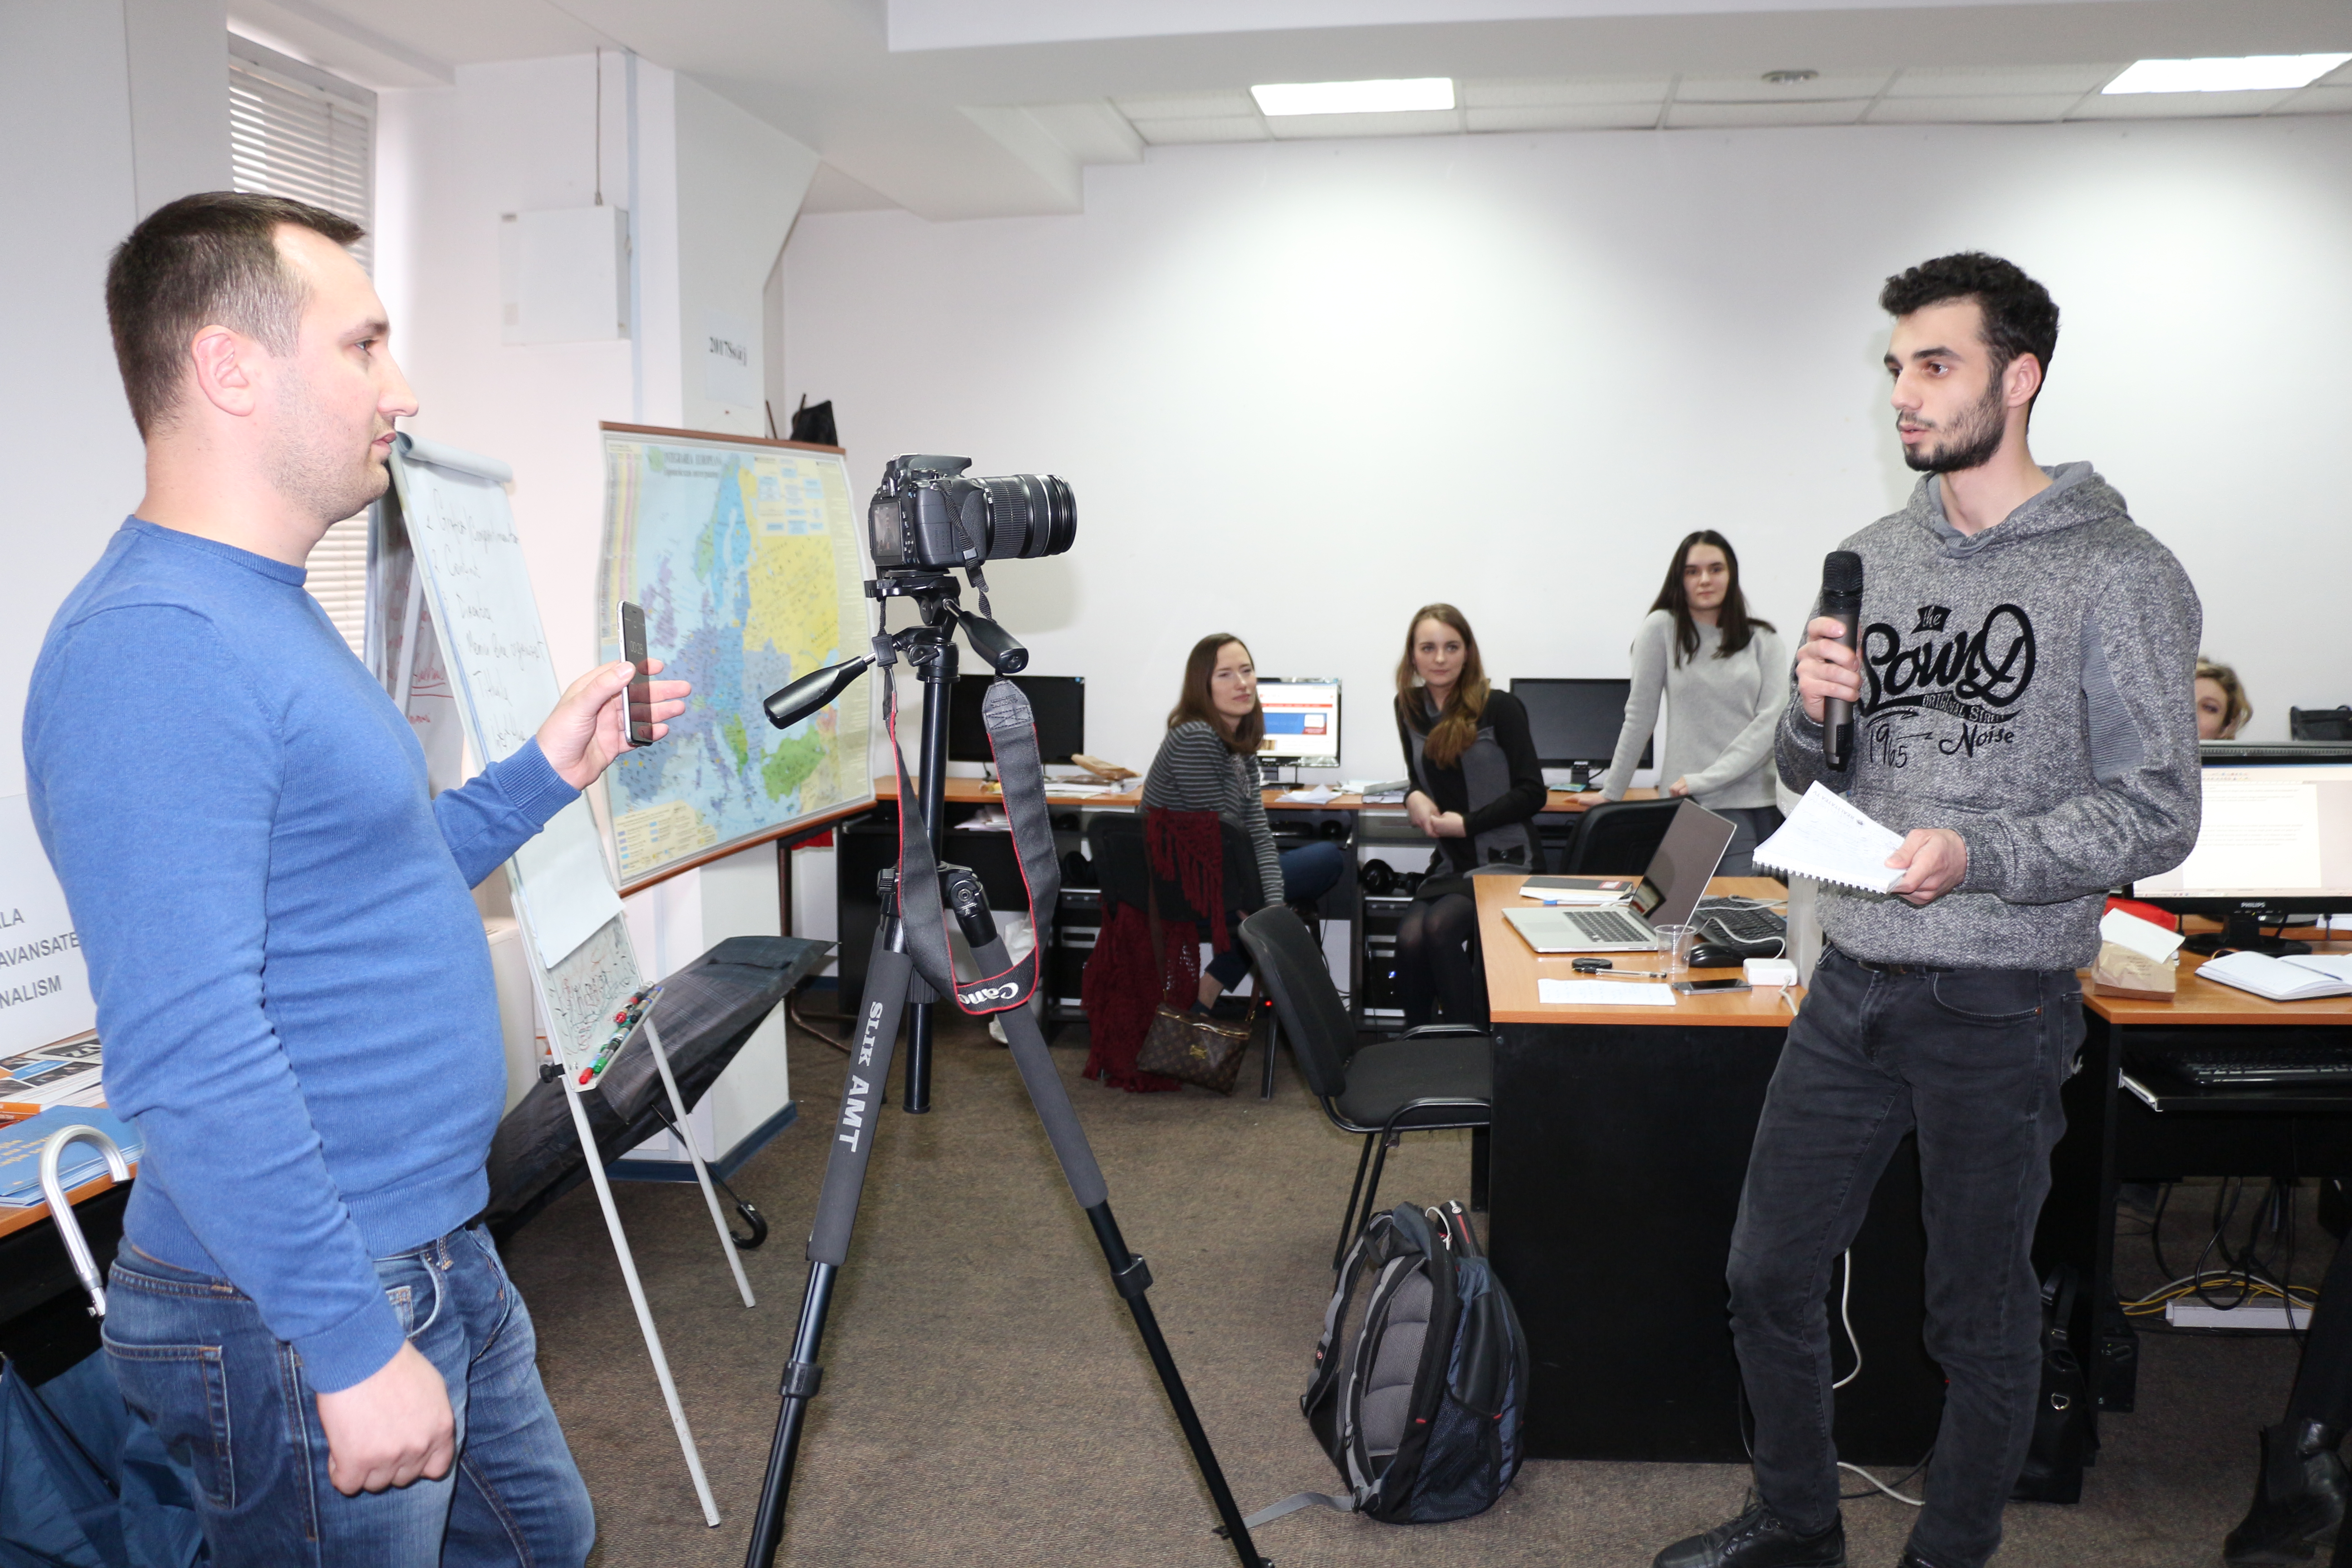 For the First Time, SAJ Students Tried Digital Journalism at the AGORA News Portal